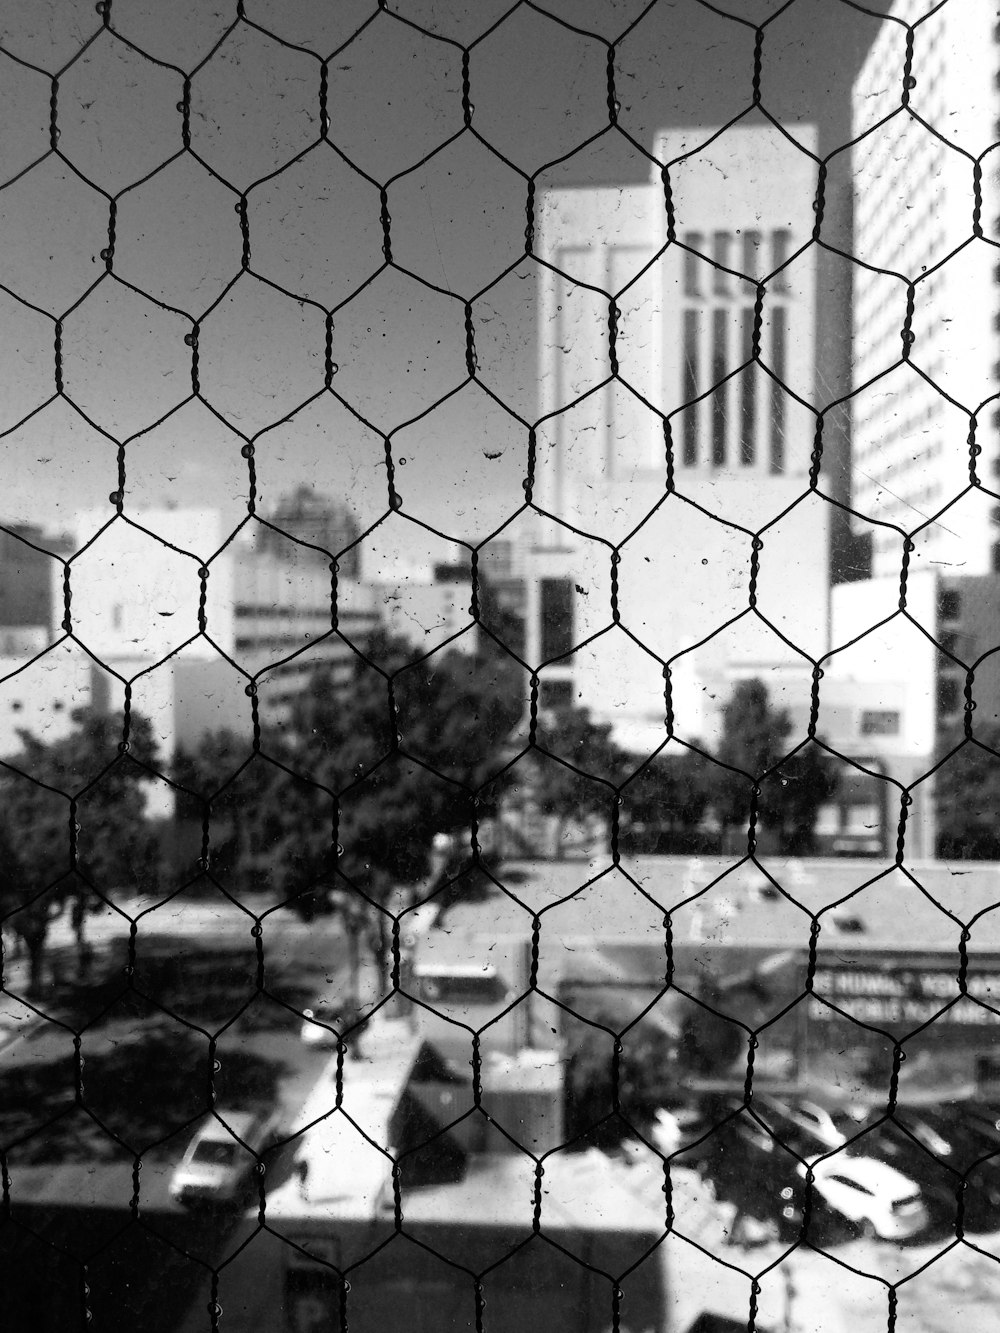 brown metal screen across city building grayscale photo